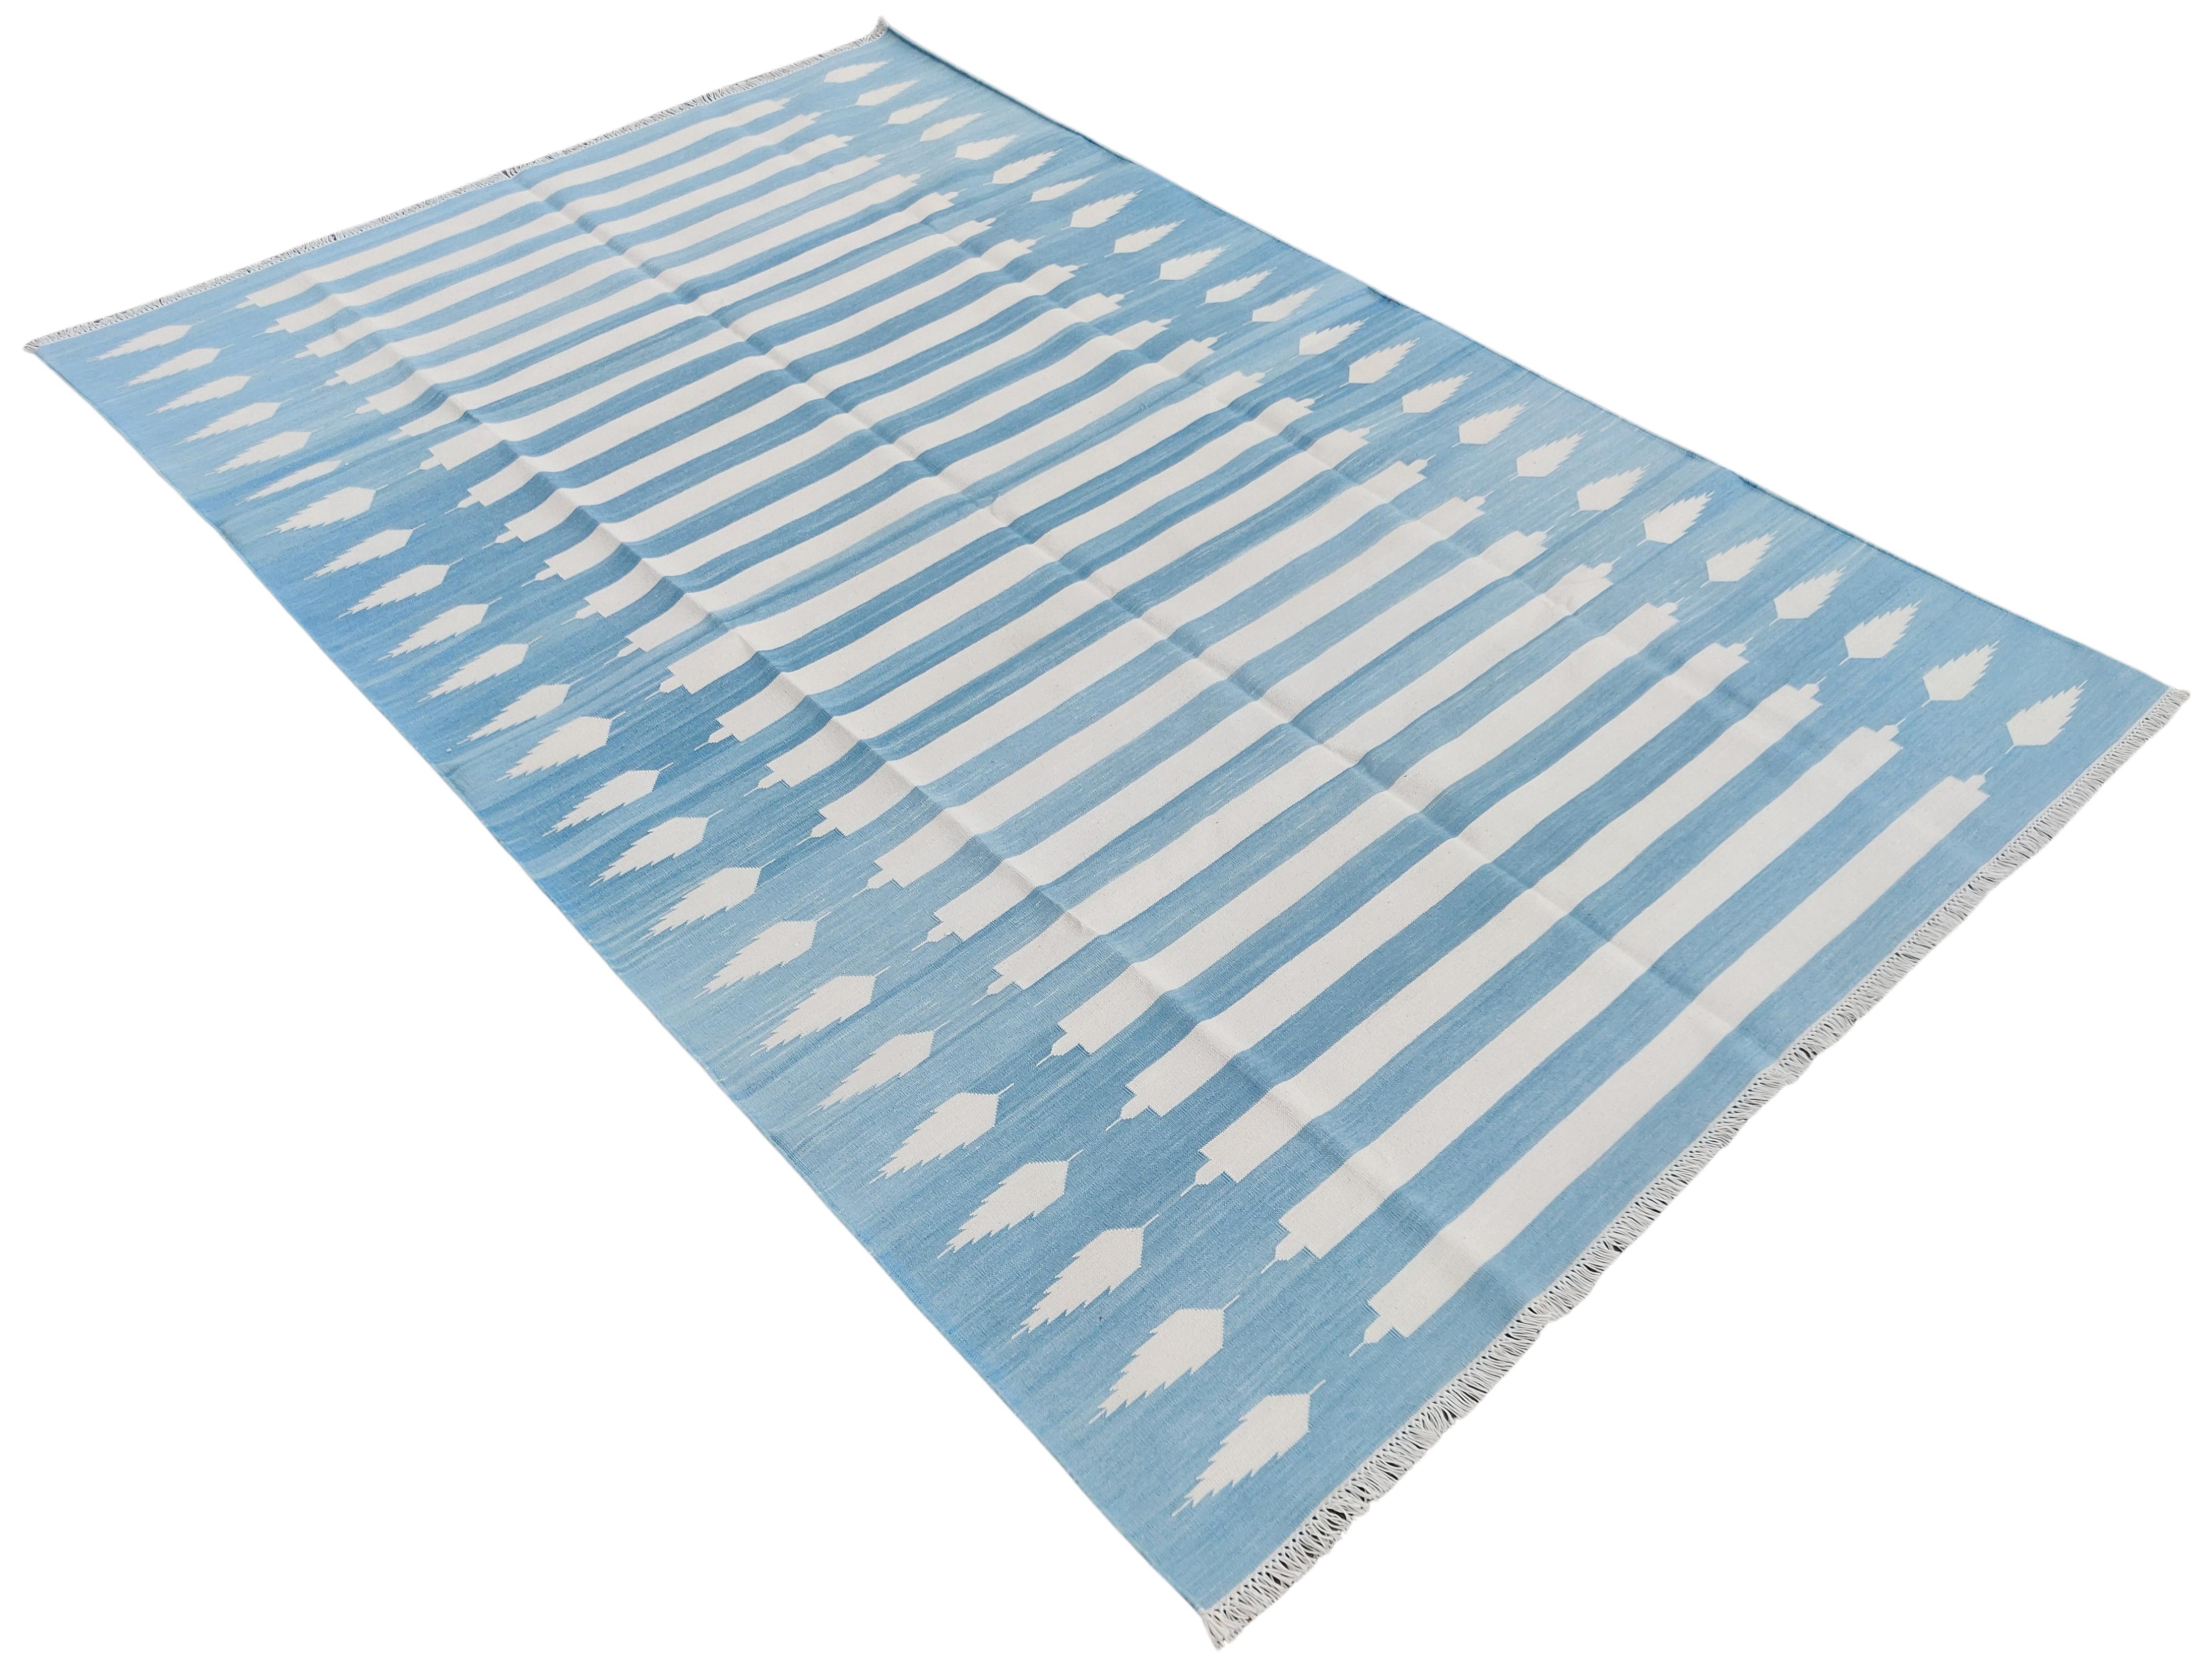 Cotton Natural Vegetable Dyed, Sky Blue And White Striped Indian Rug - 5'x8'
These special flat-weave dhurries are hand-woven with 15 ply 100% cotton yarn. Due to the special manufacturing techniques used to create our rugs, the size and color of